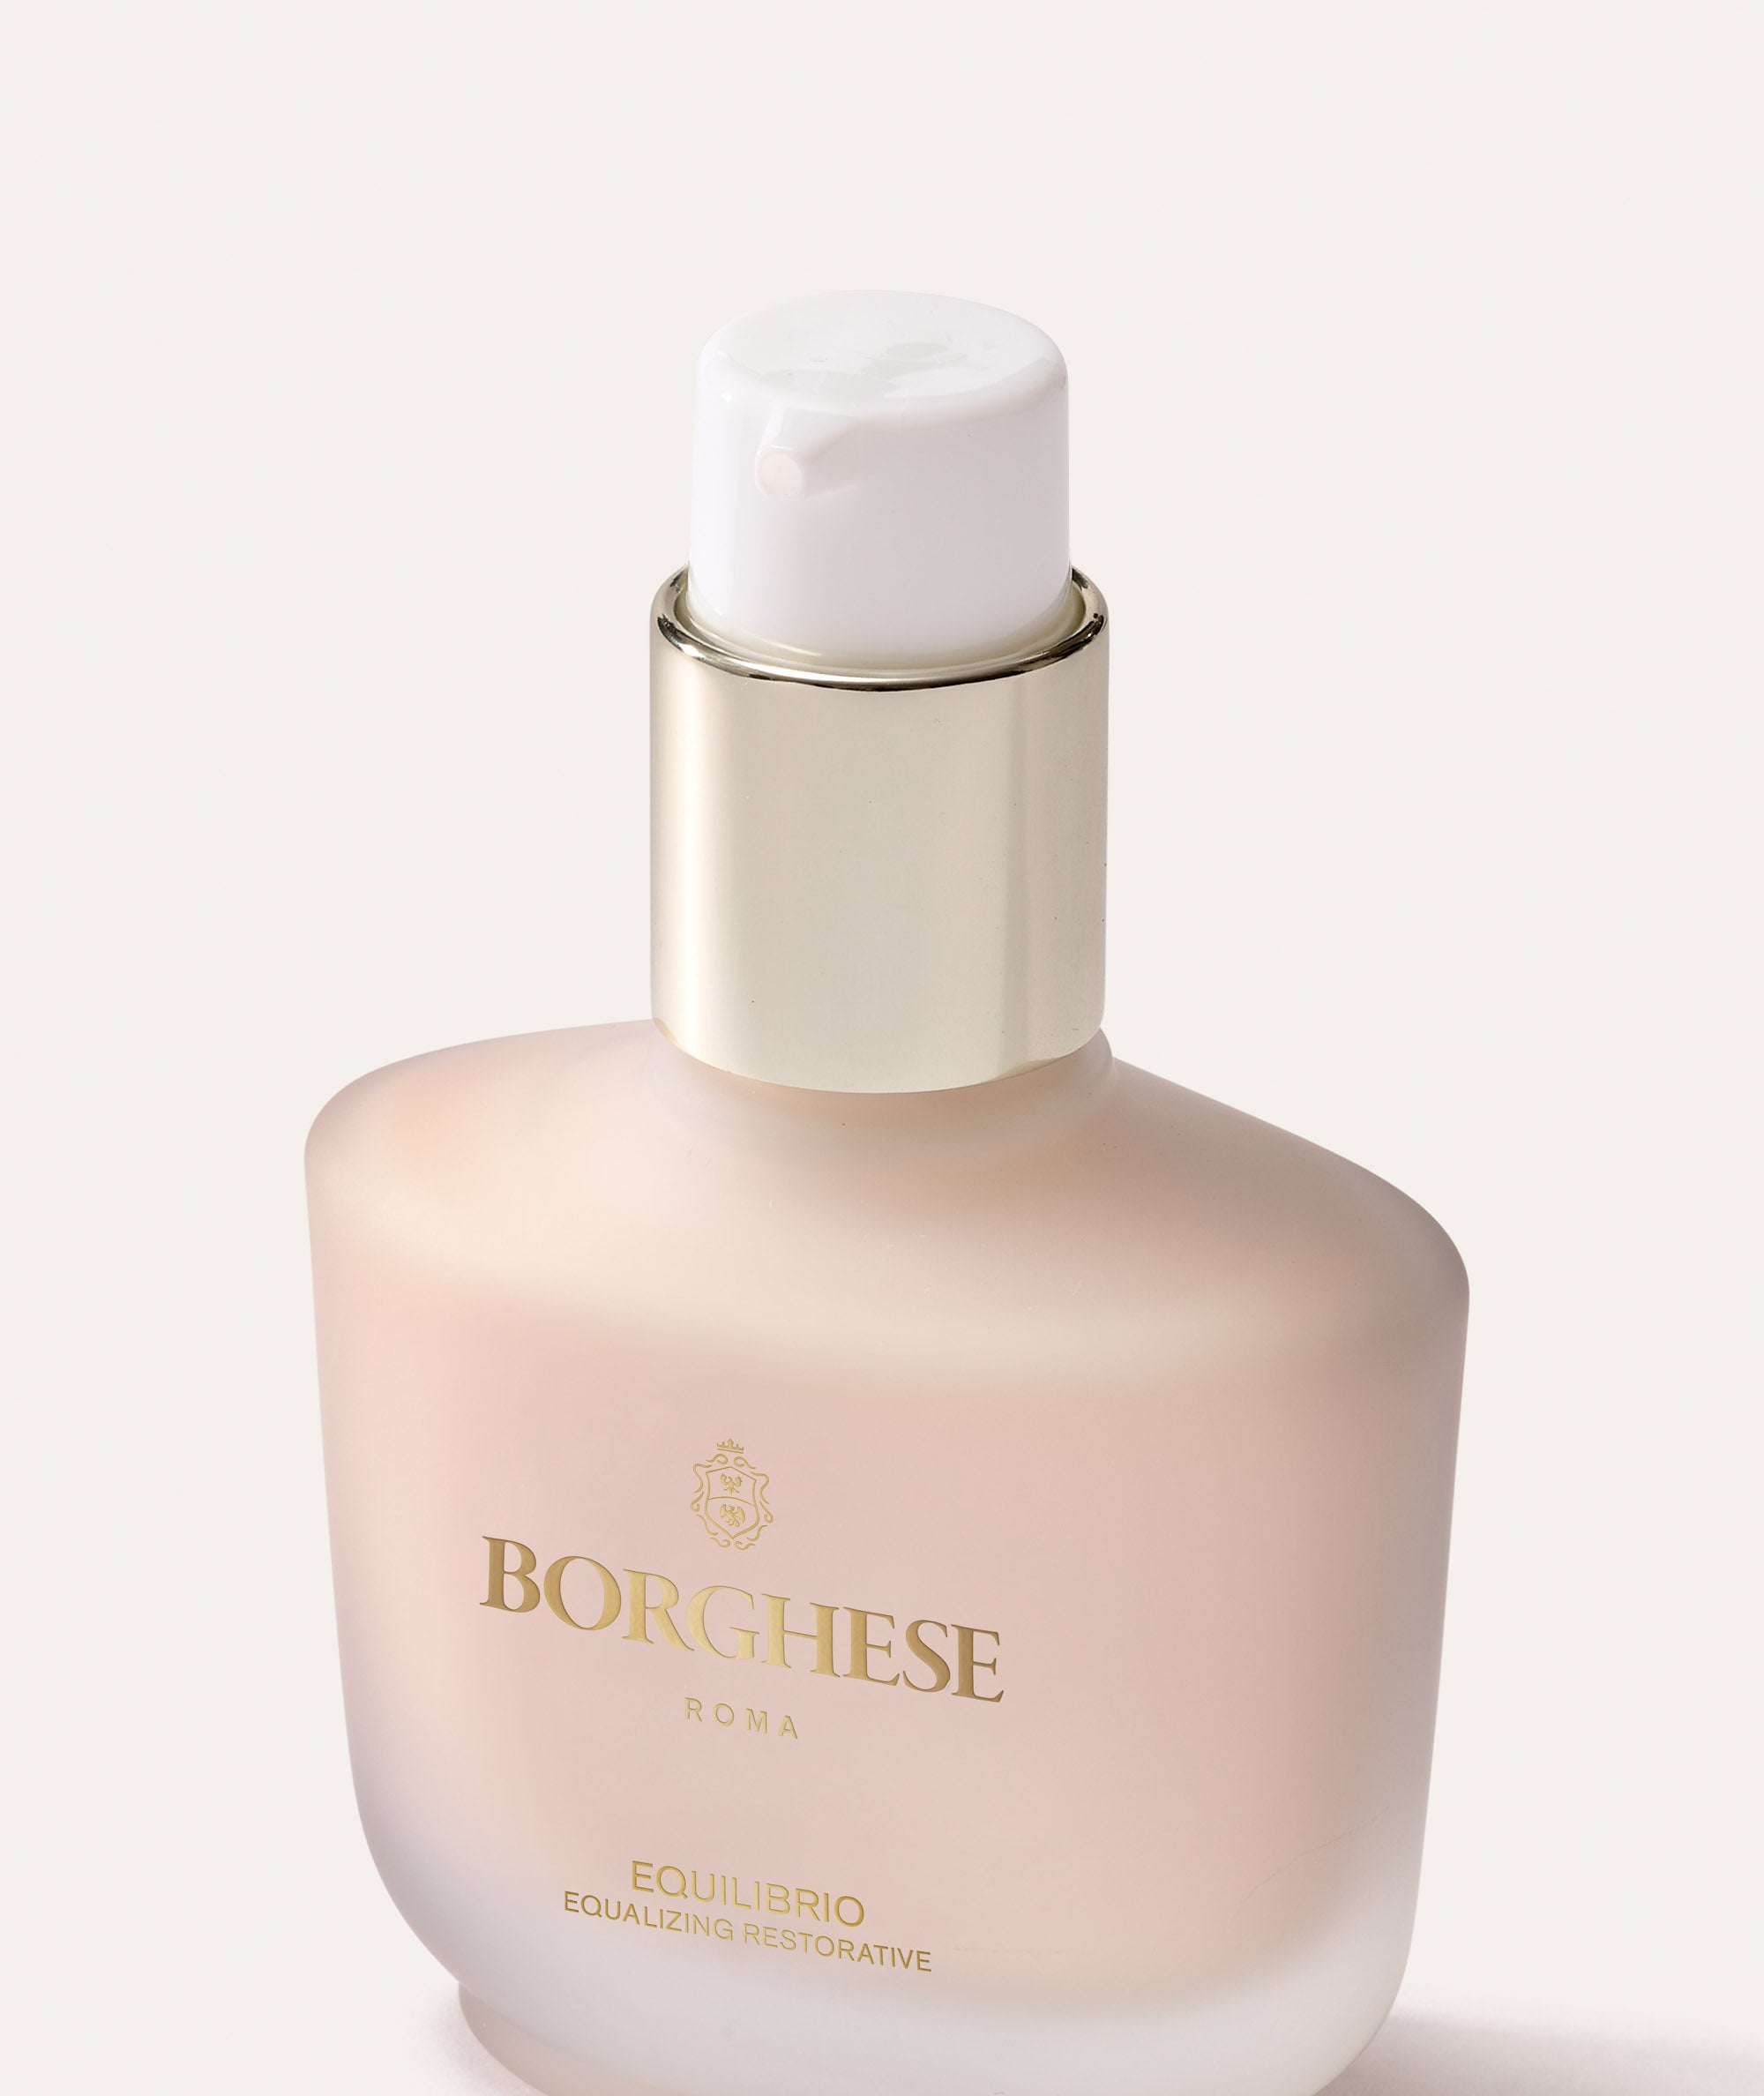 This is a picture of the Borghese Equilibrio Daily Moisturizer dispenser